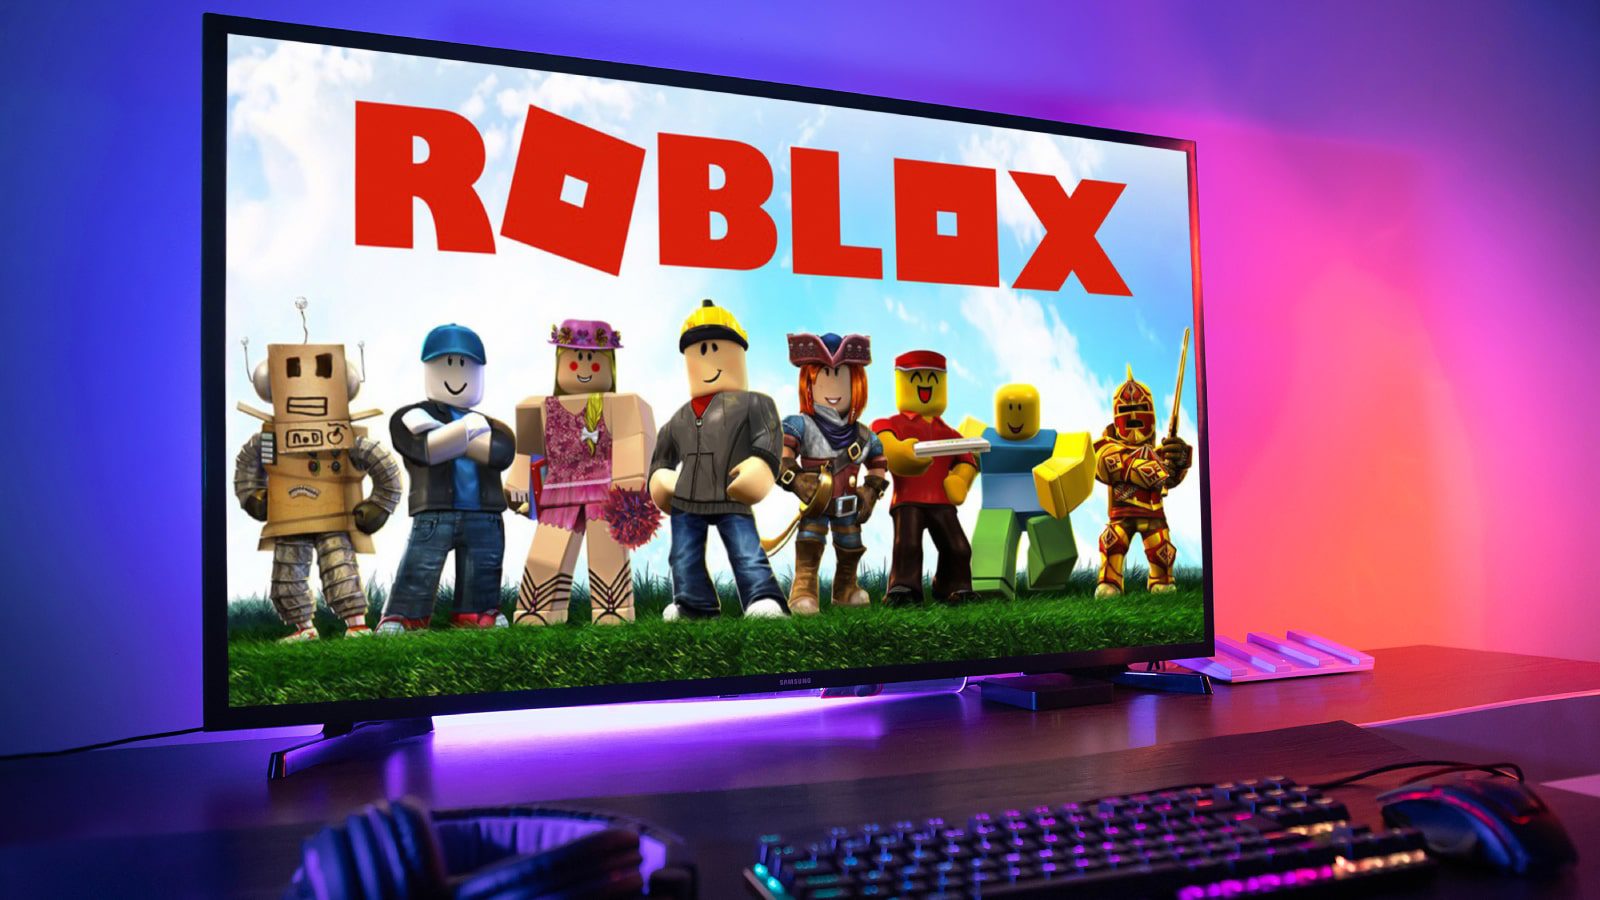 The Roblox loading screen on a monitor.